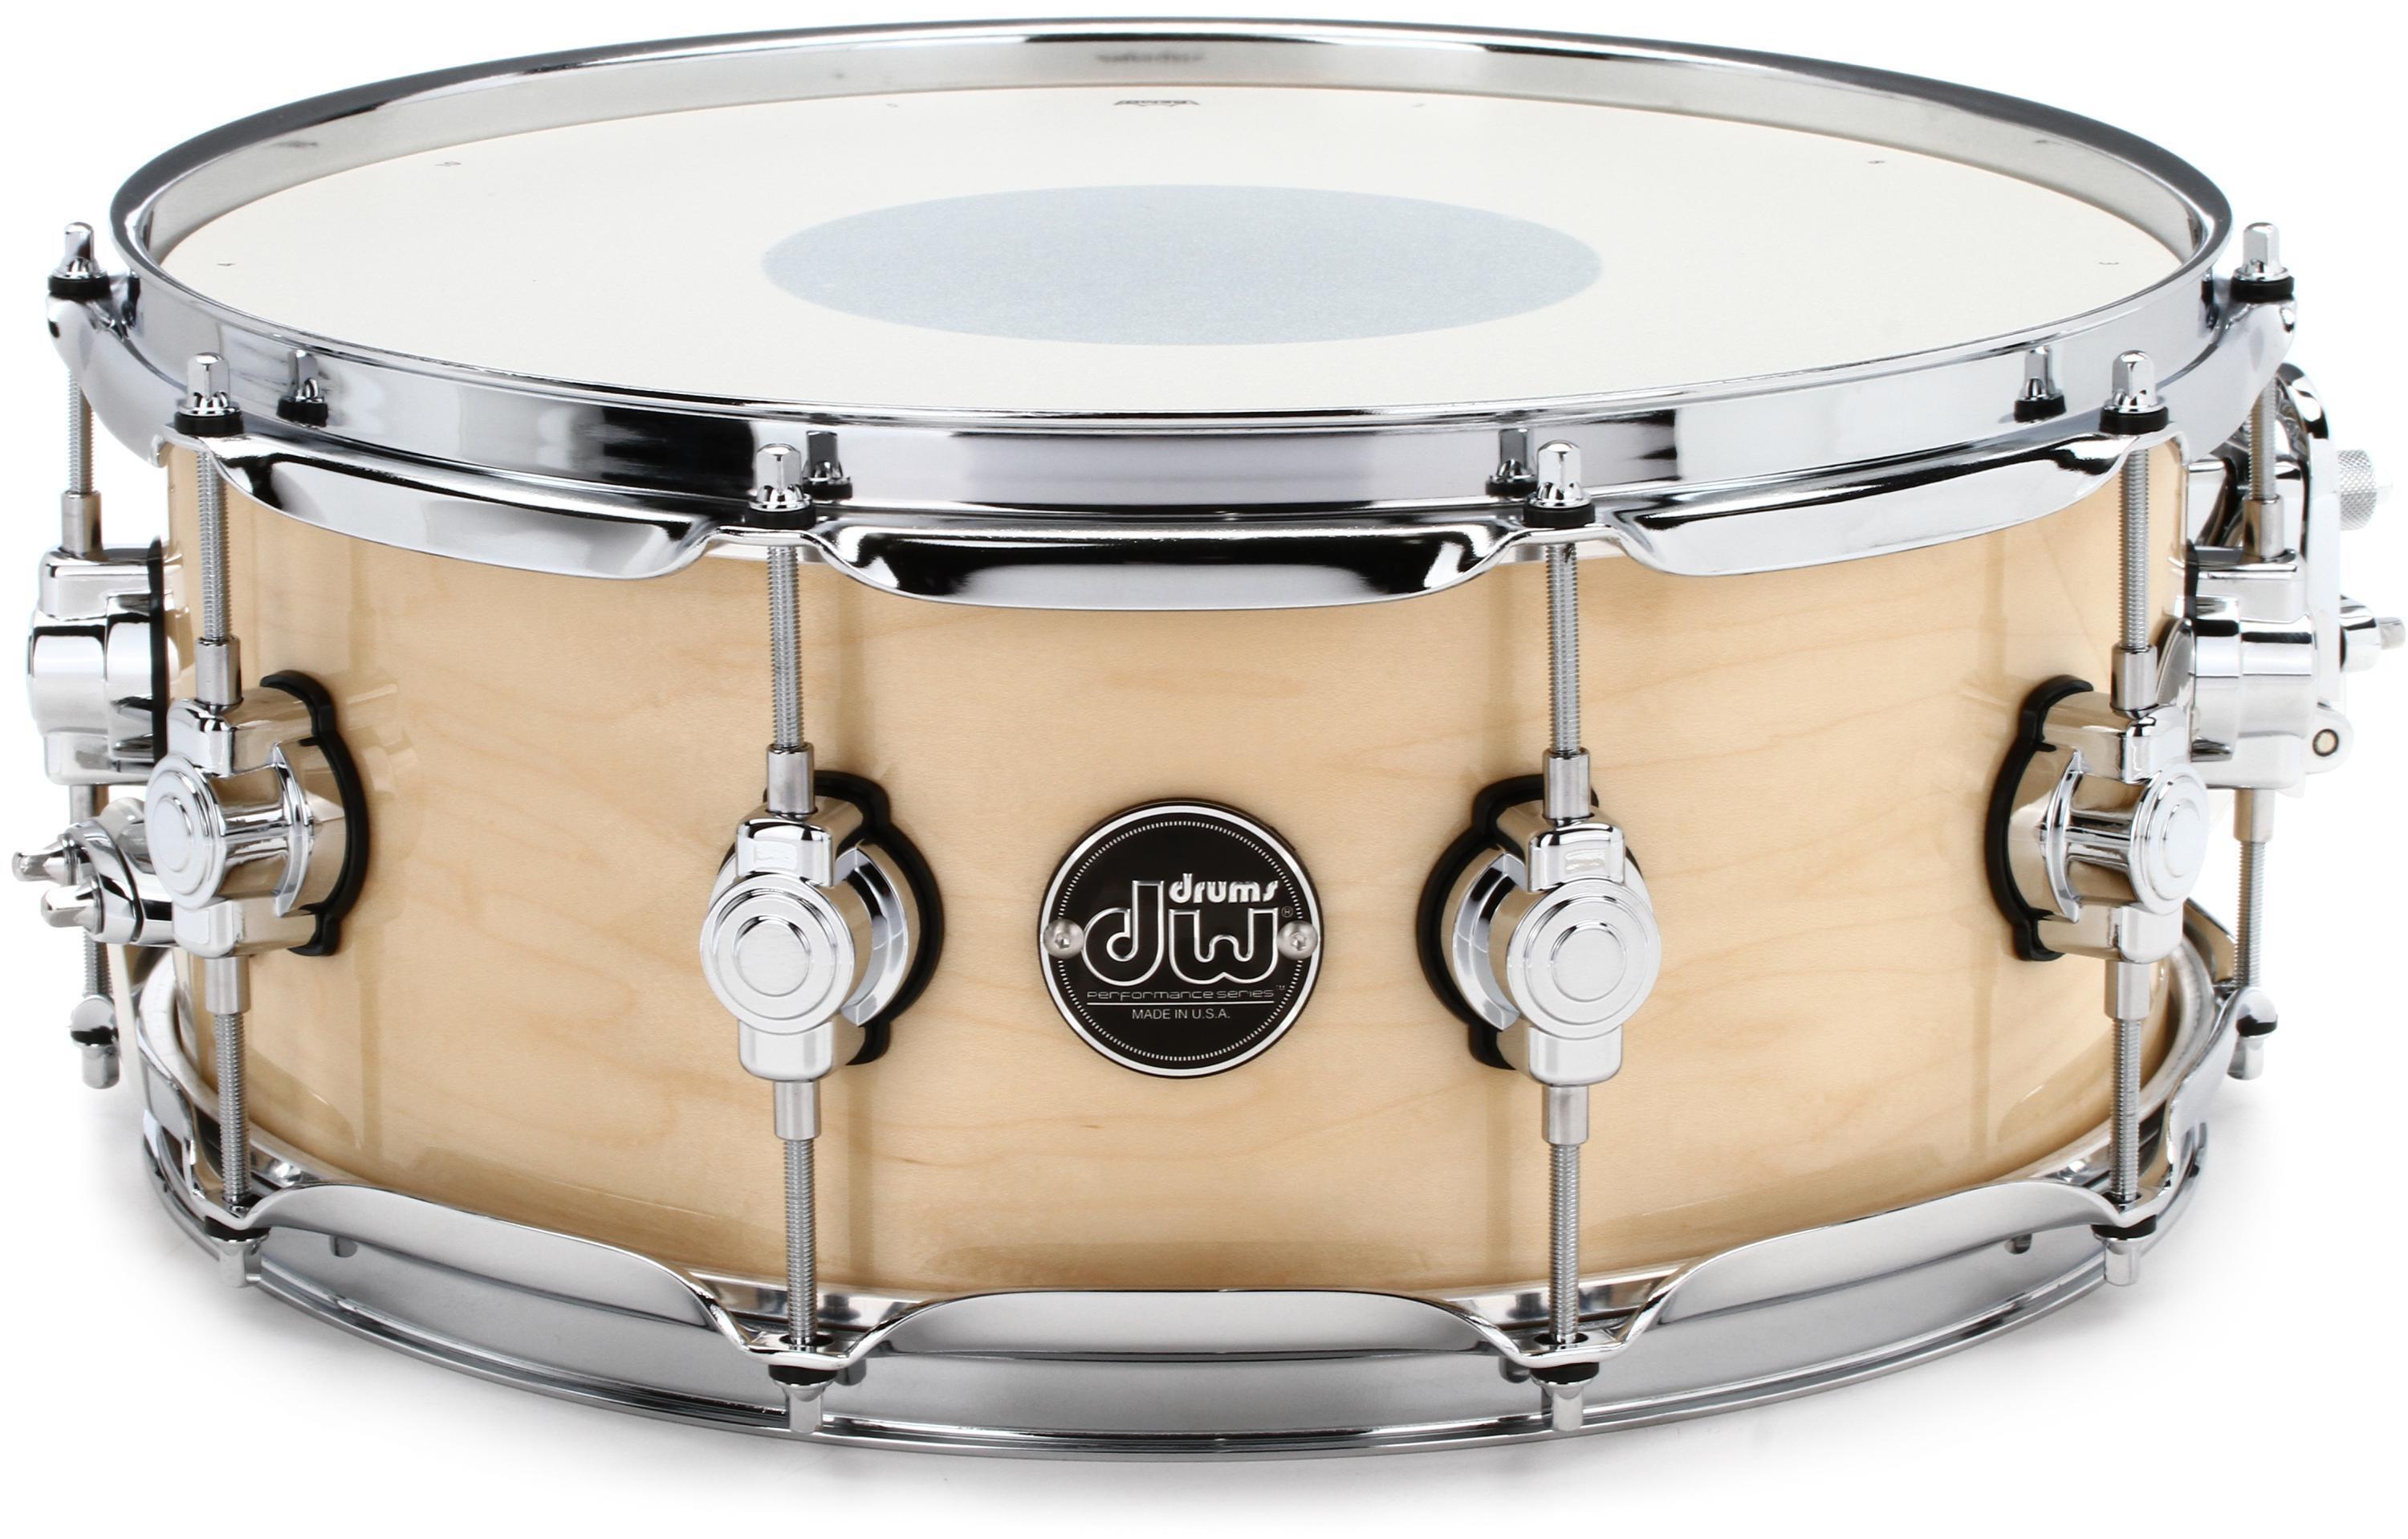 DW Performance Series Snare Drum - 5.5 x 14 inch - Natural Lacquer